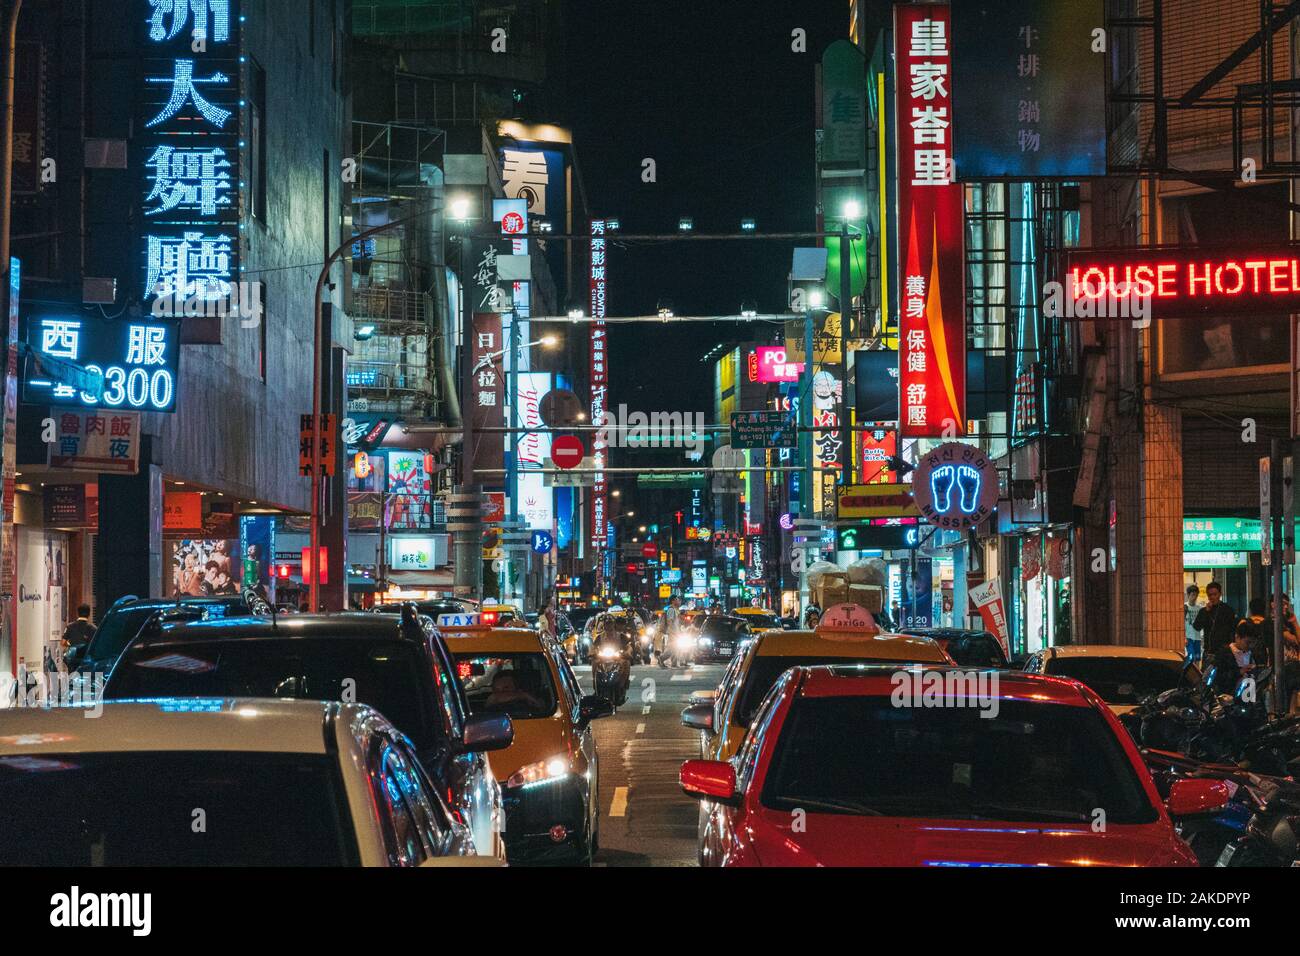 Bright illuminated signs line the streets as traffic trundles by in central Taipei, Taiwan Stock Photo